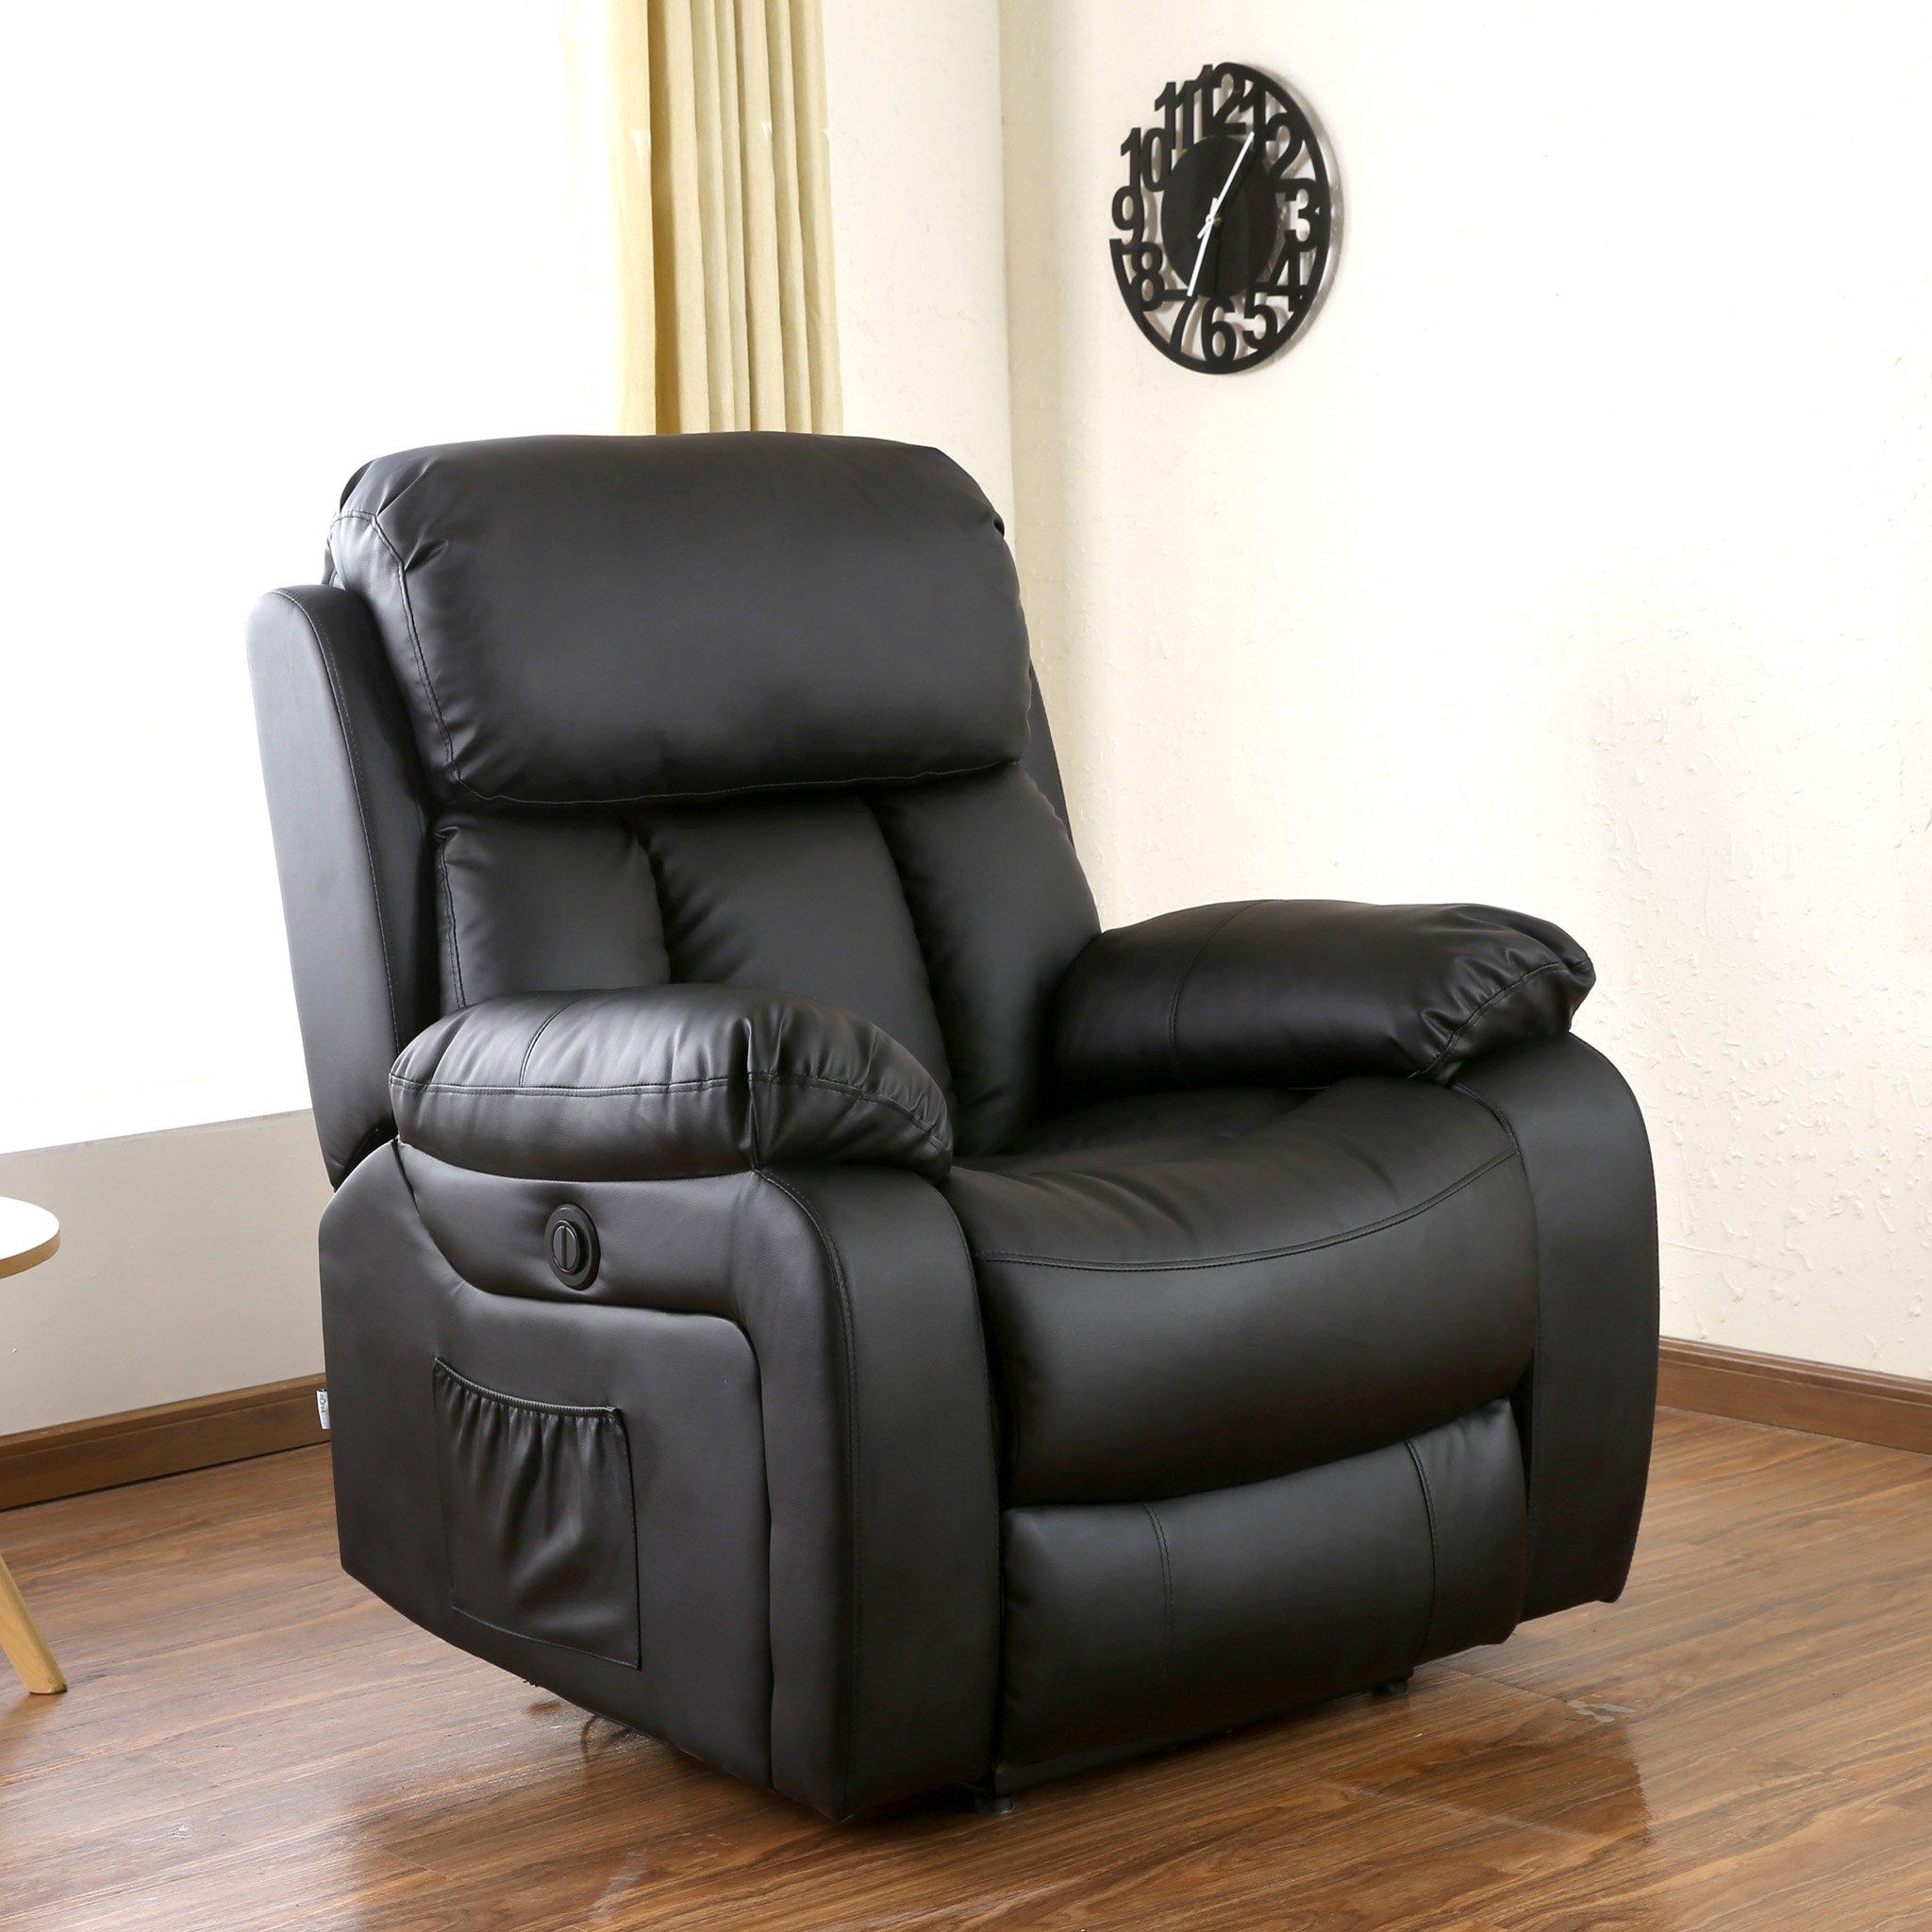 Chester Electric Bonded Leather Automatic Recliner Heat & Massage Chair